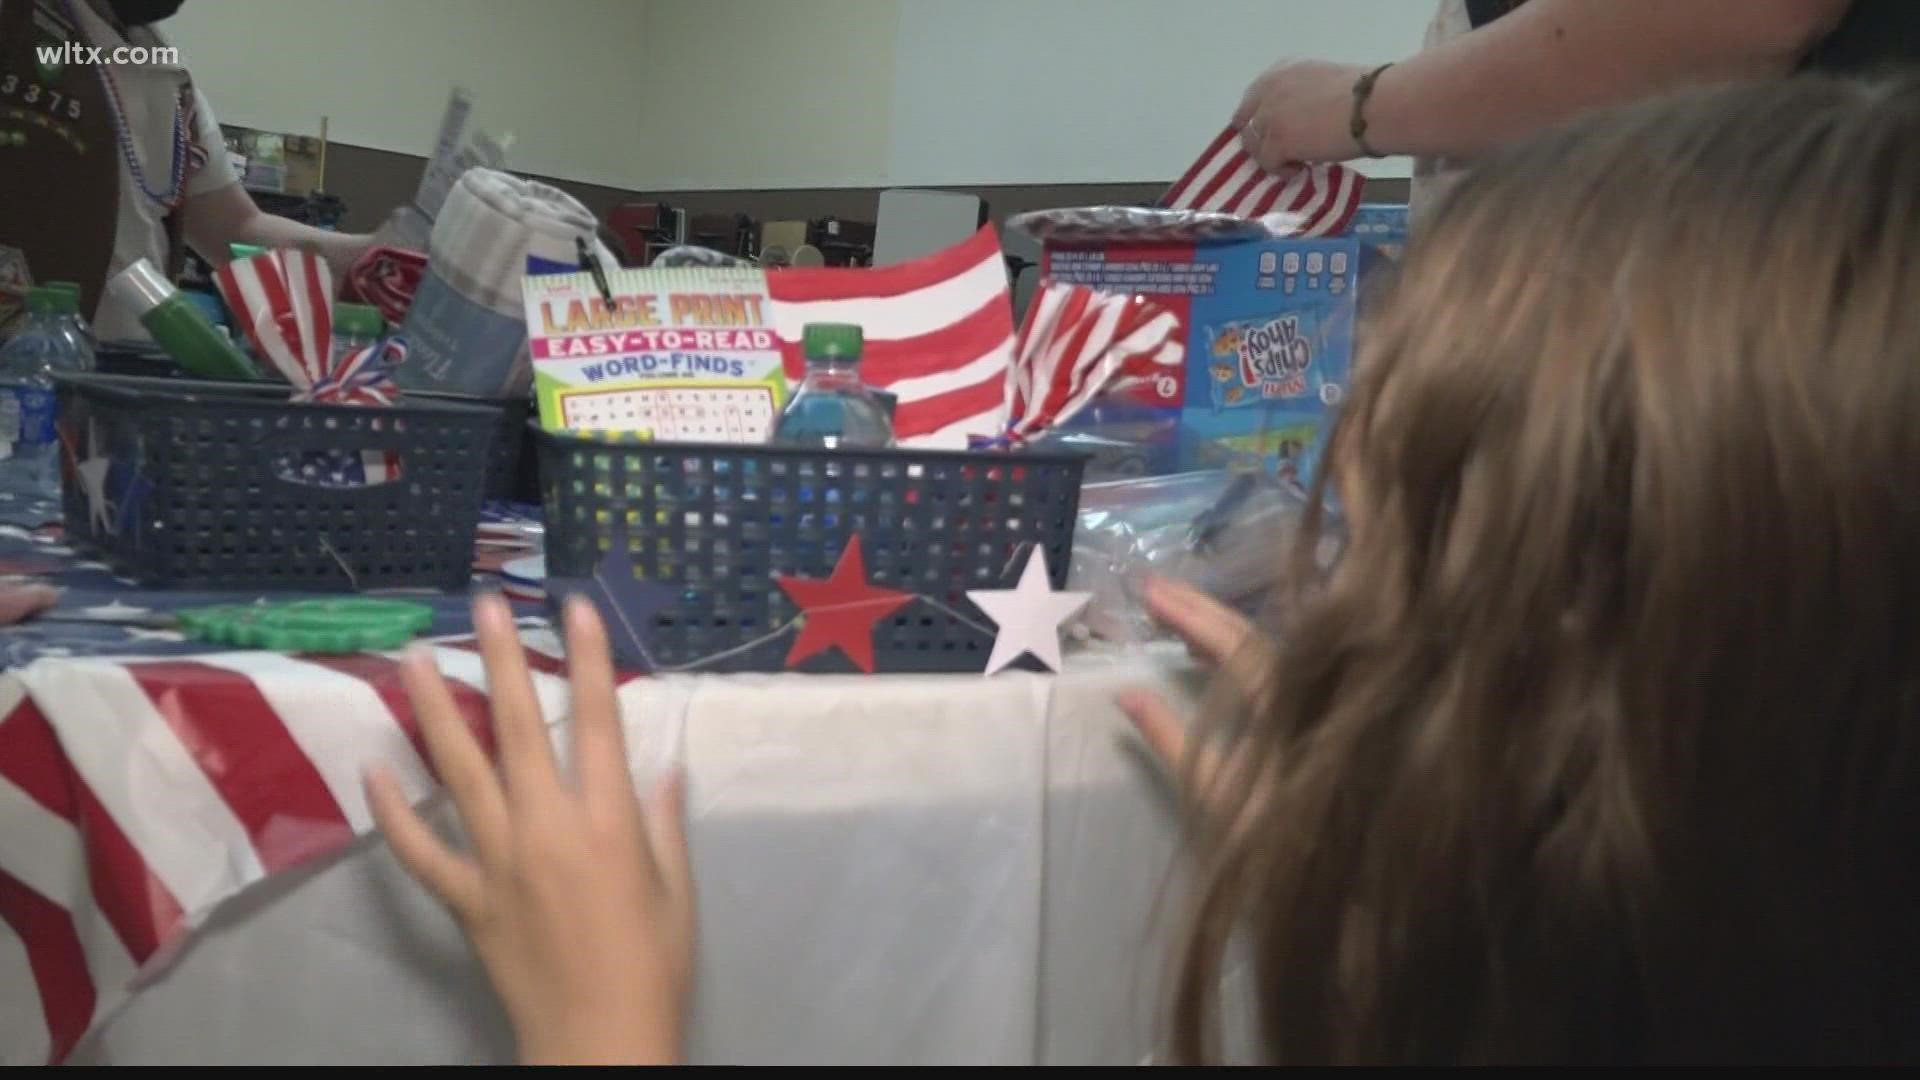 On Veterans Day, Girl Scouts Troop 3375 honored America's Veterans by coming up with a way to make them feel special.